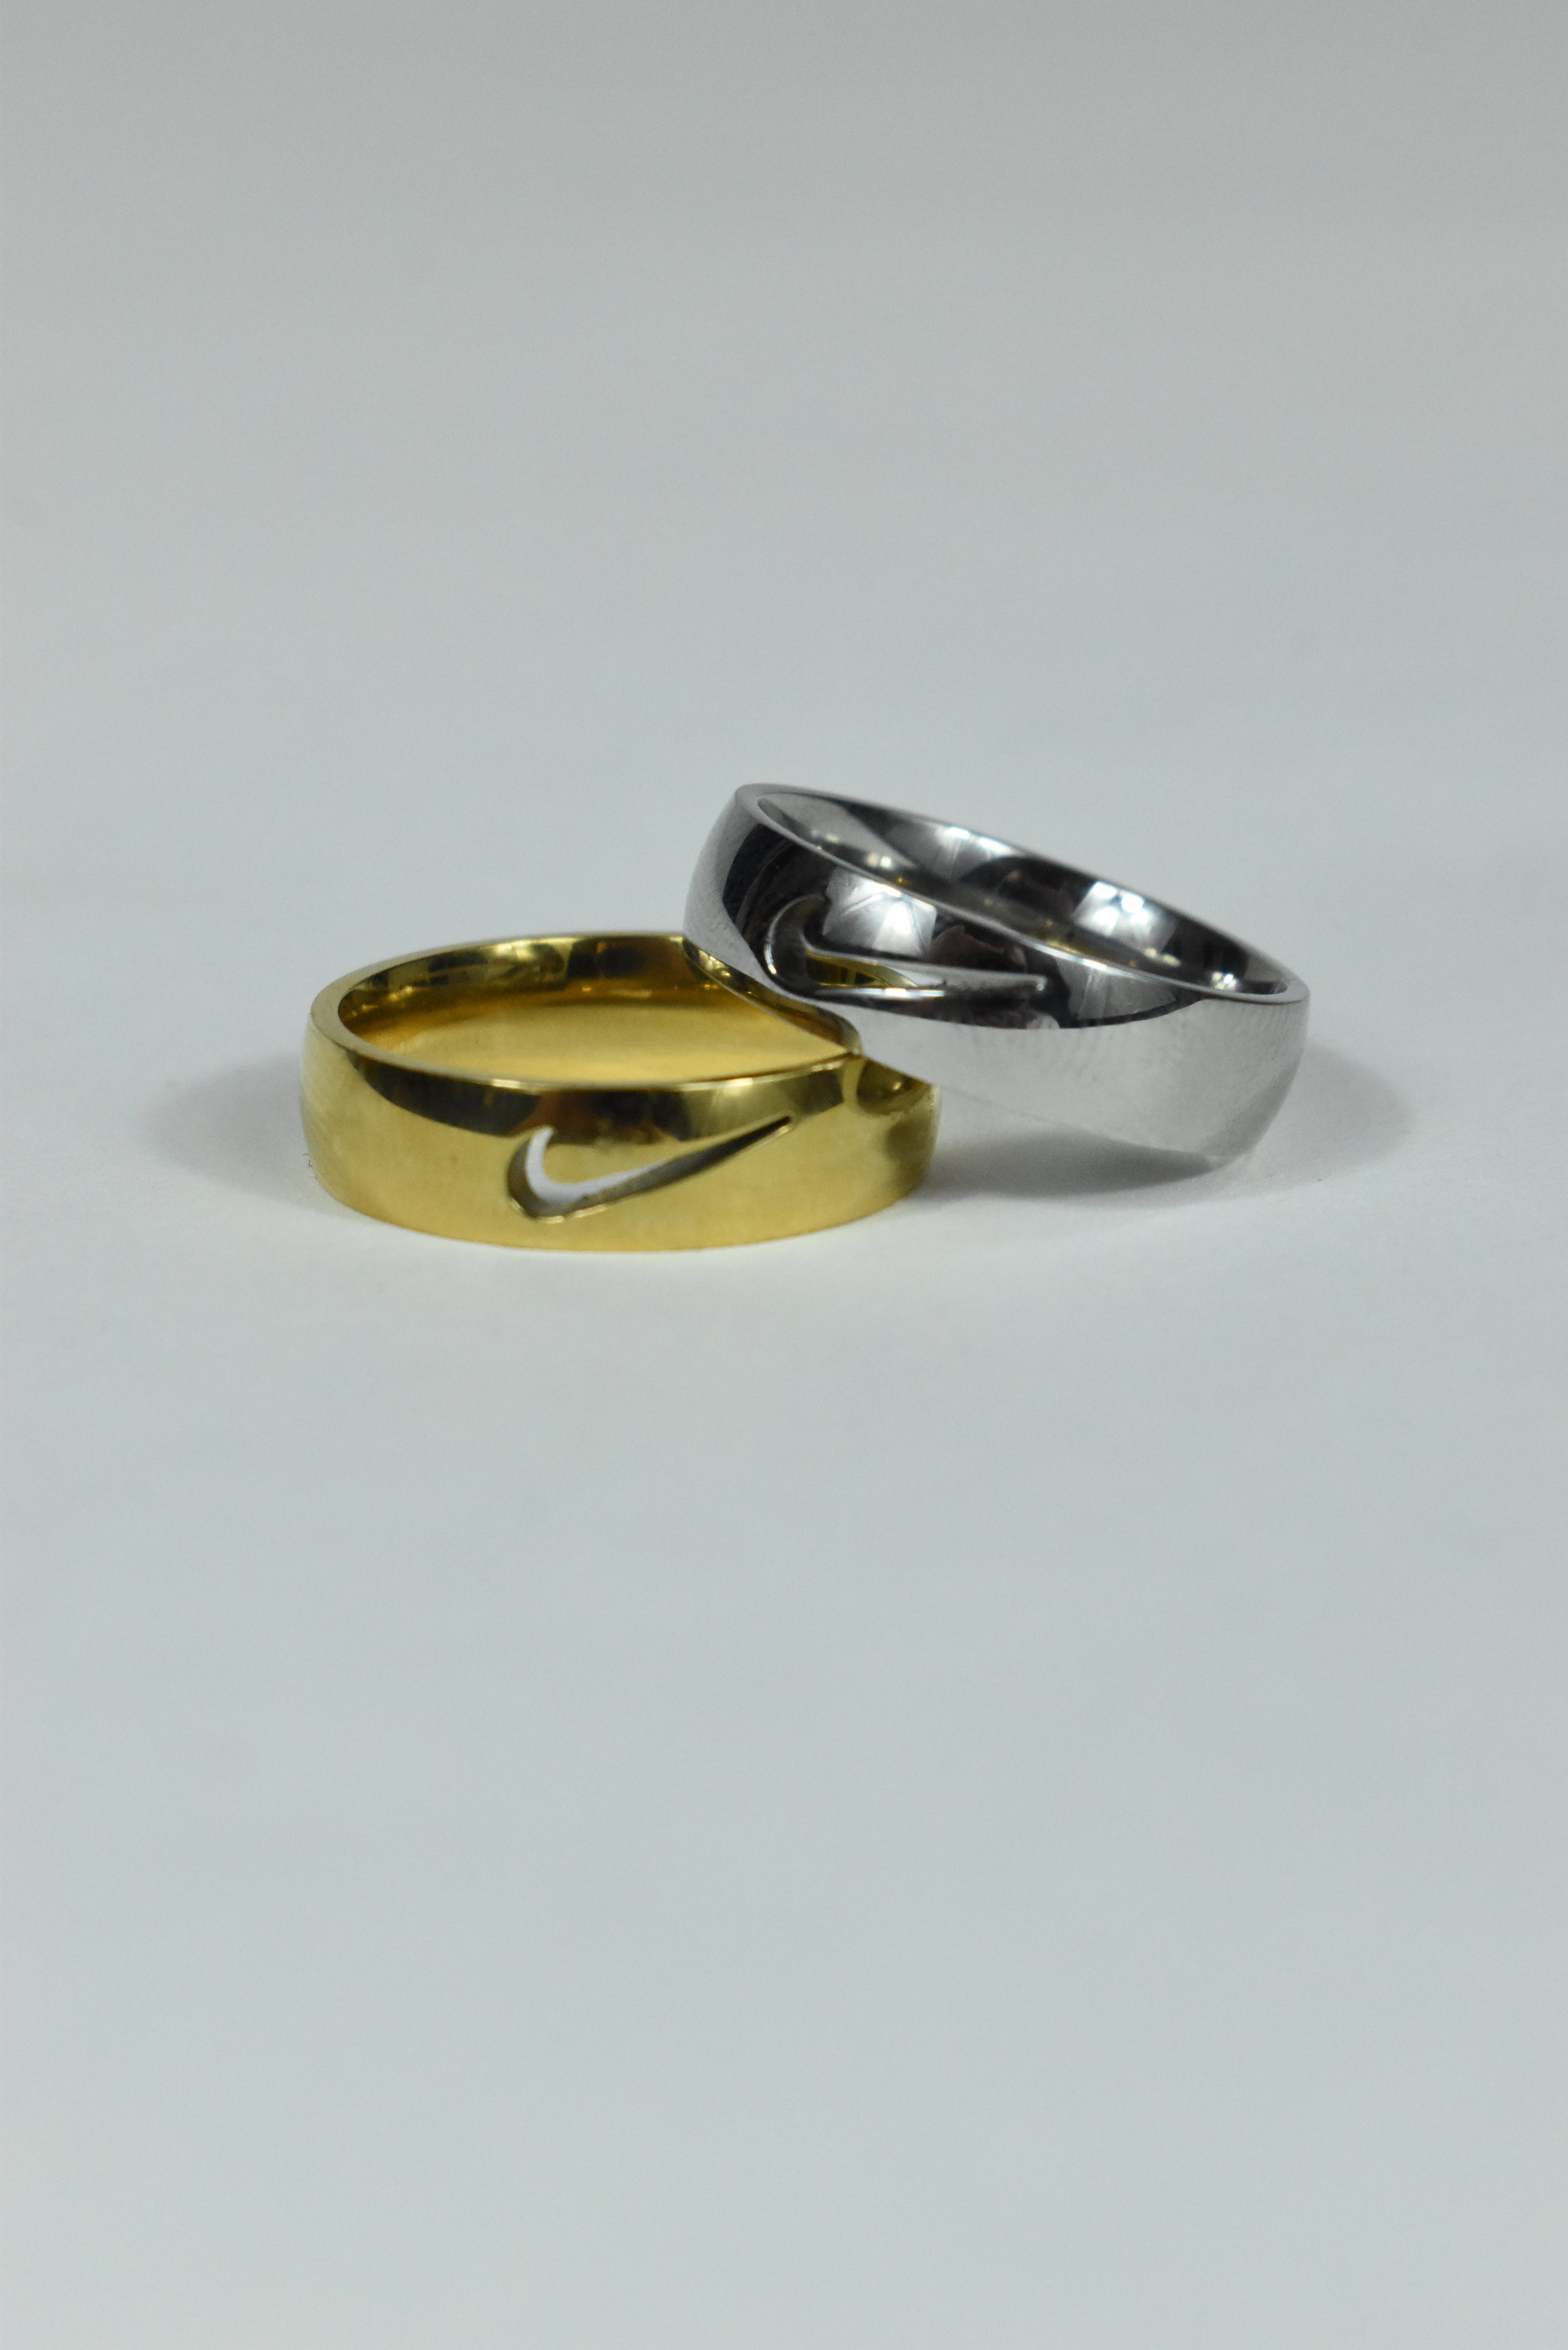 New Unisex Nike Cutout Ring Silver